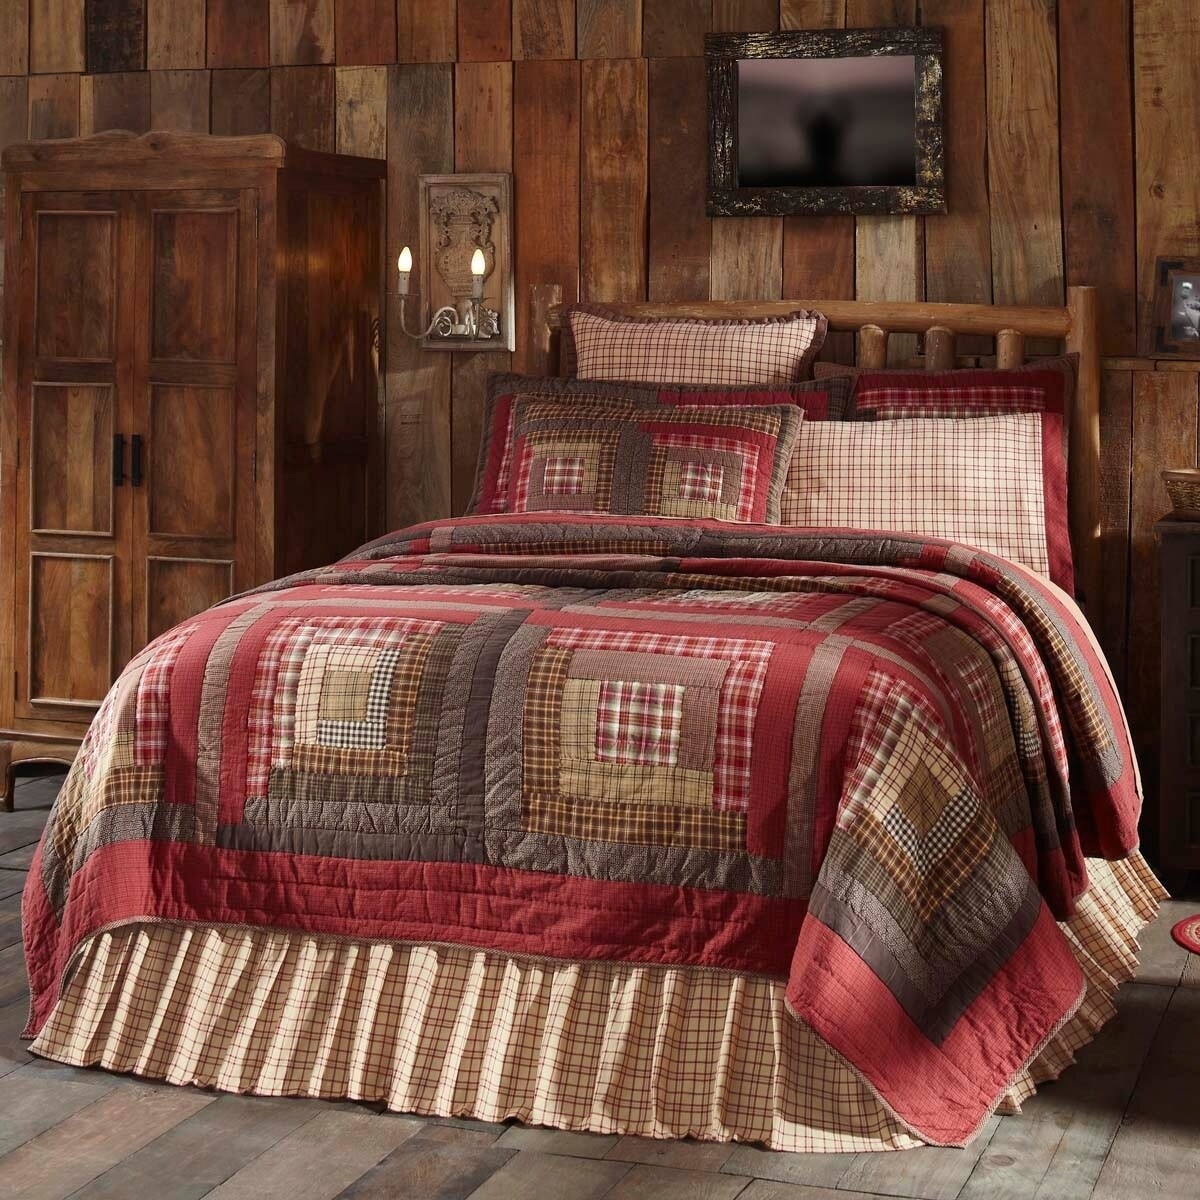 Shop Tacoma King Quilt 110wx97l On Sale Overstock 15389317